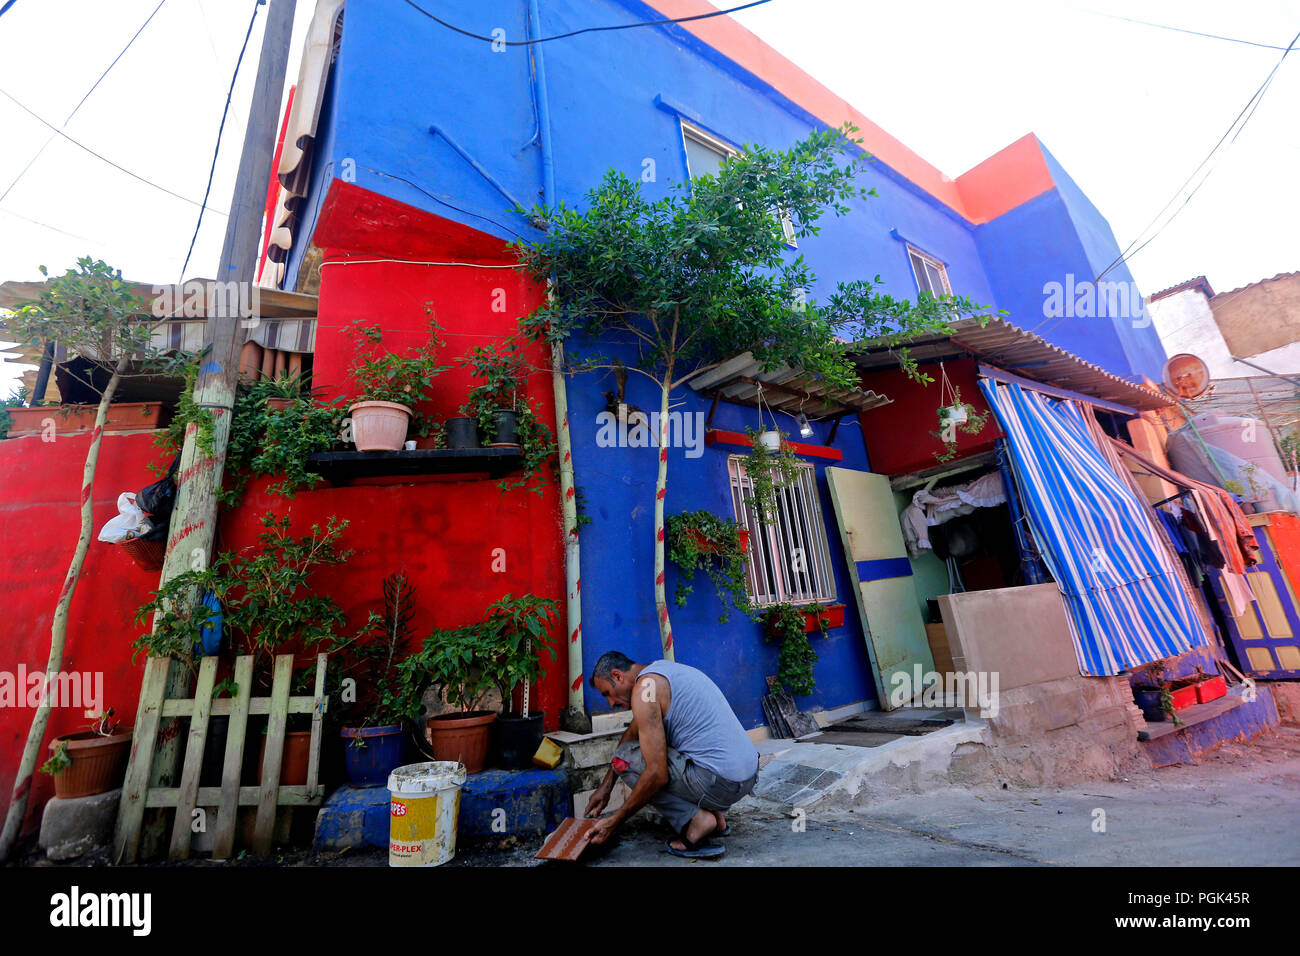 Ouzai, Lebanon. 26th Aug, 2018. A building with colorful paintings is seen in Ouzai, south of Beirut, Lebanon, on Aug. 26, 2018. Credit: Bilal Jawich/Xinhua/Alamy Live News Stock Photo